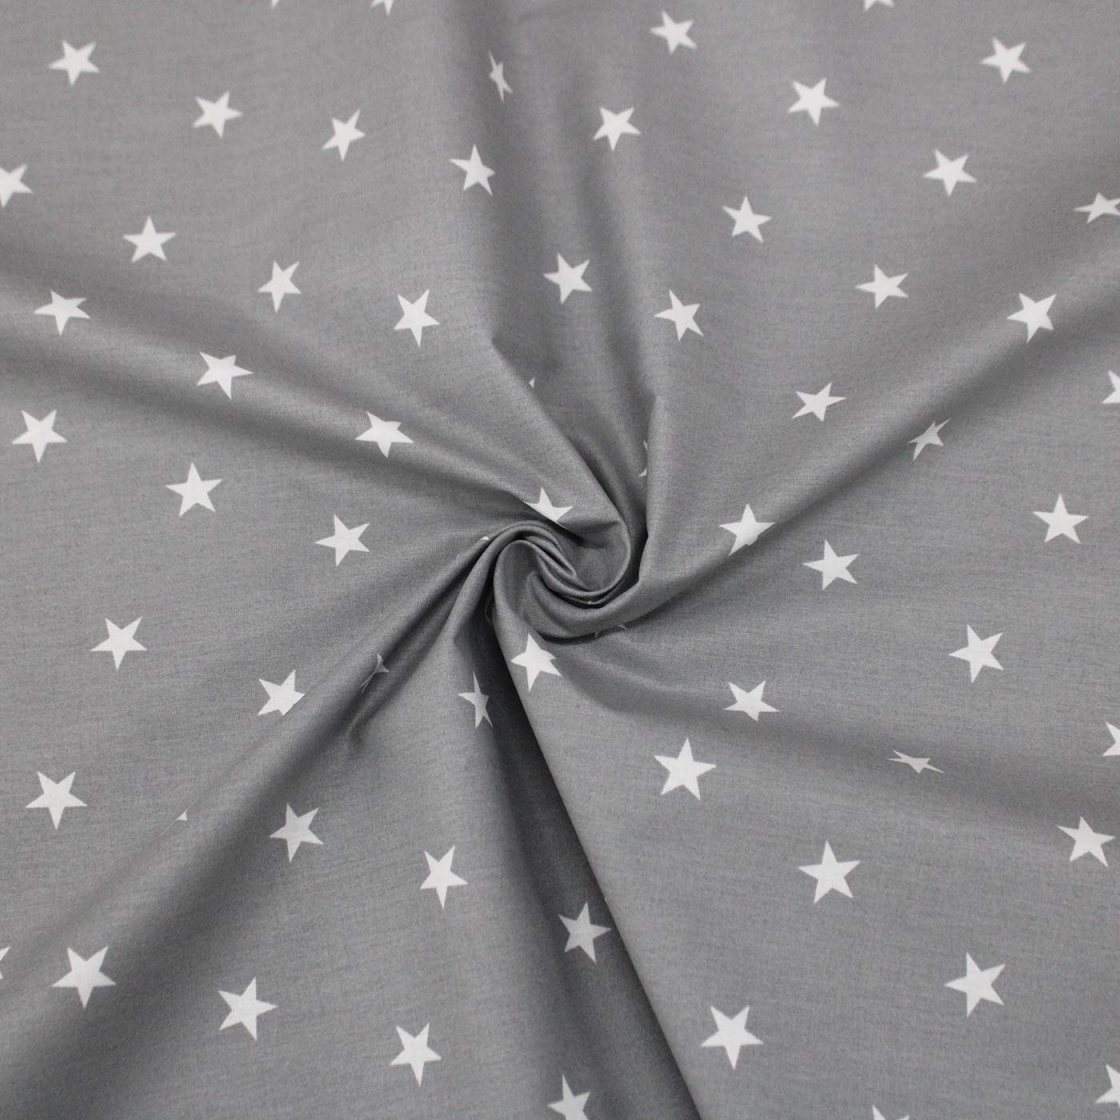 Star patterned cotton